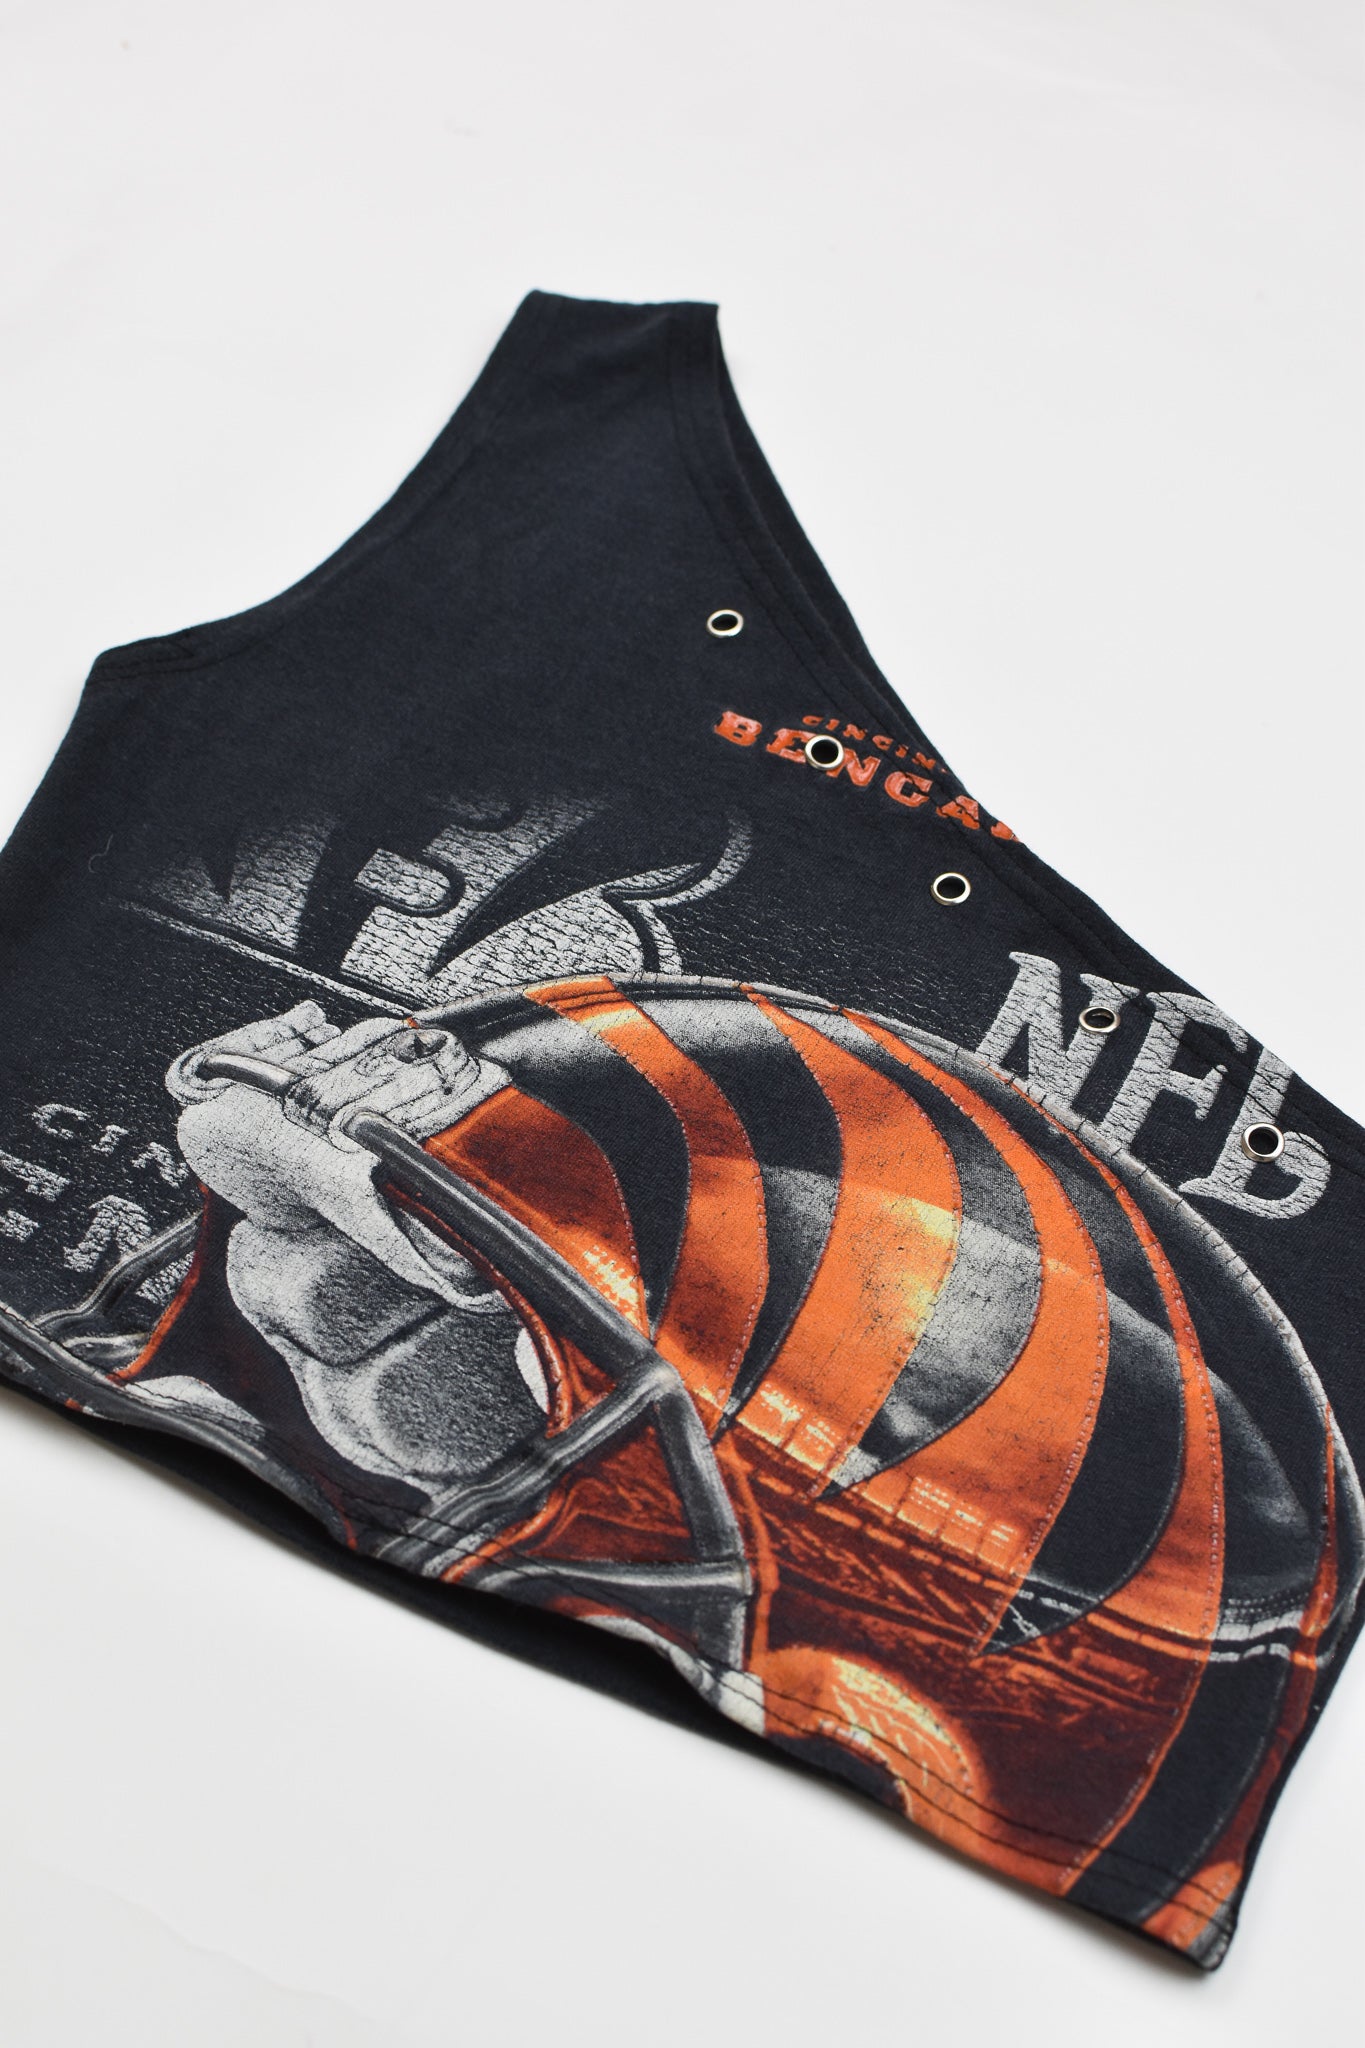 Upcycled Bengals One Shoulder Tank Top